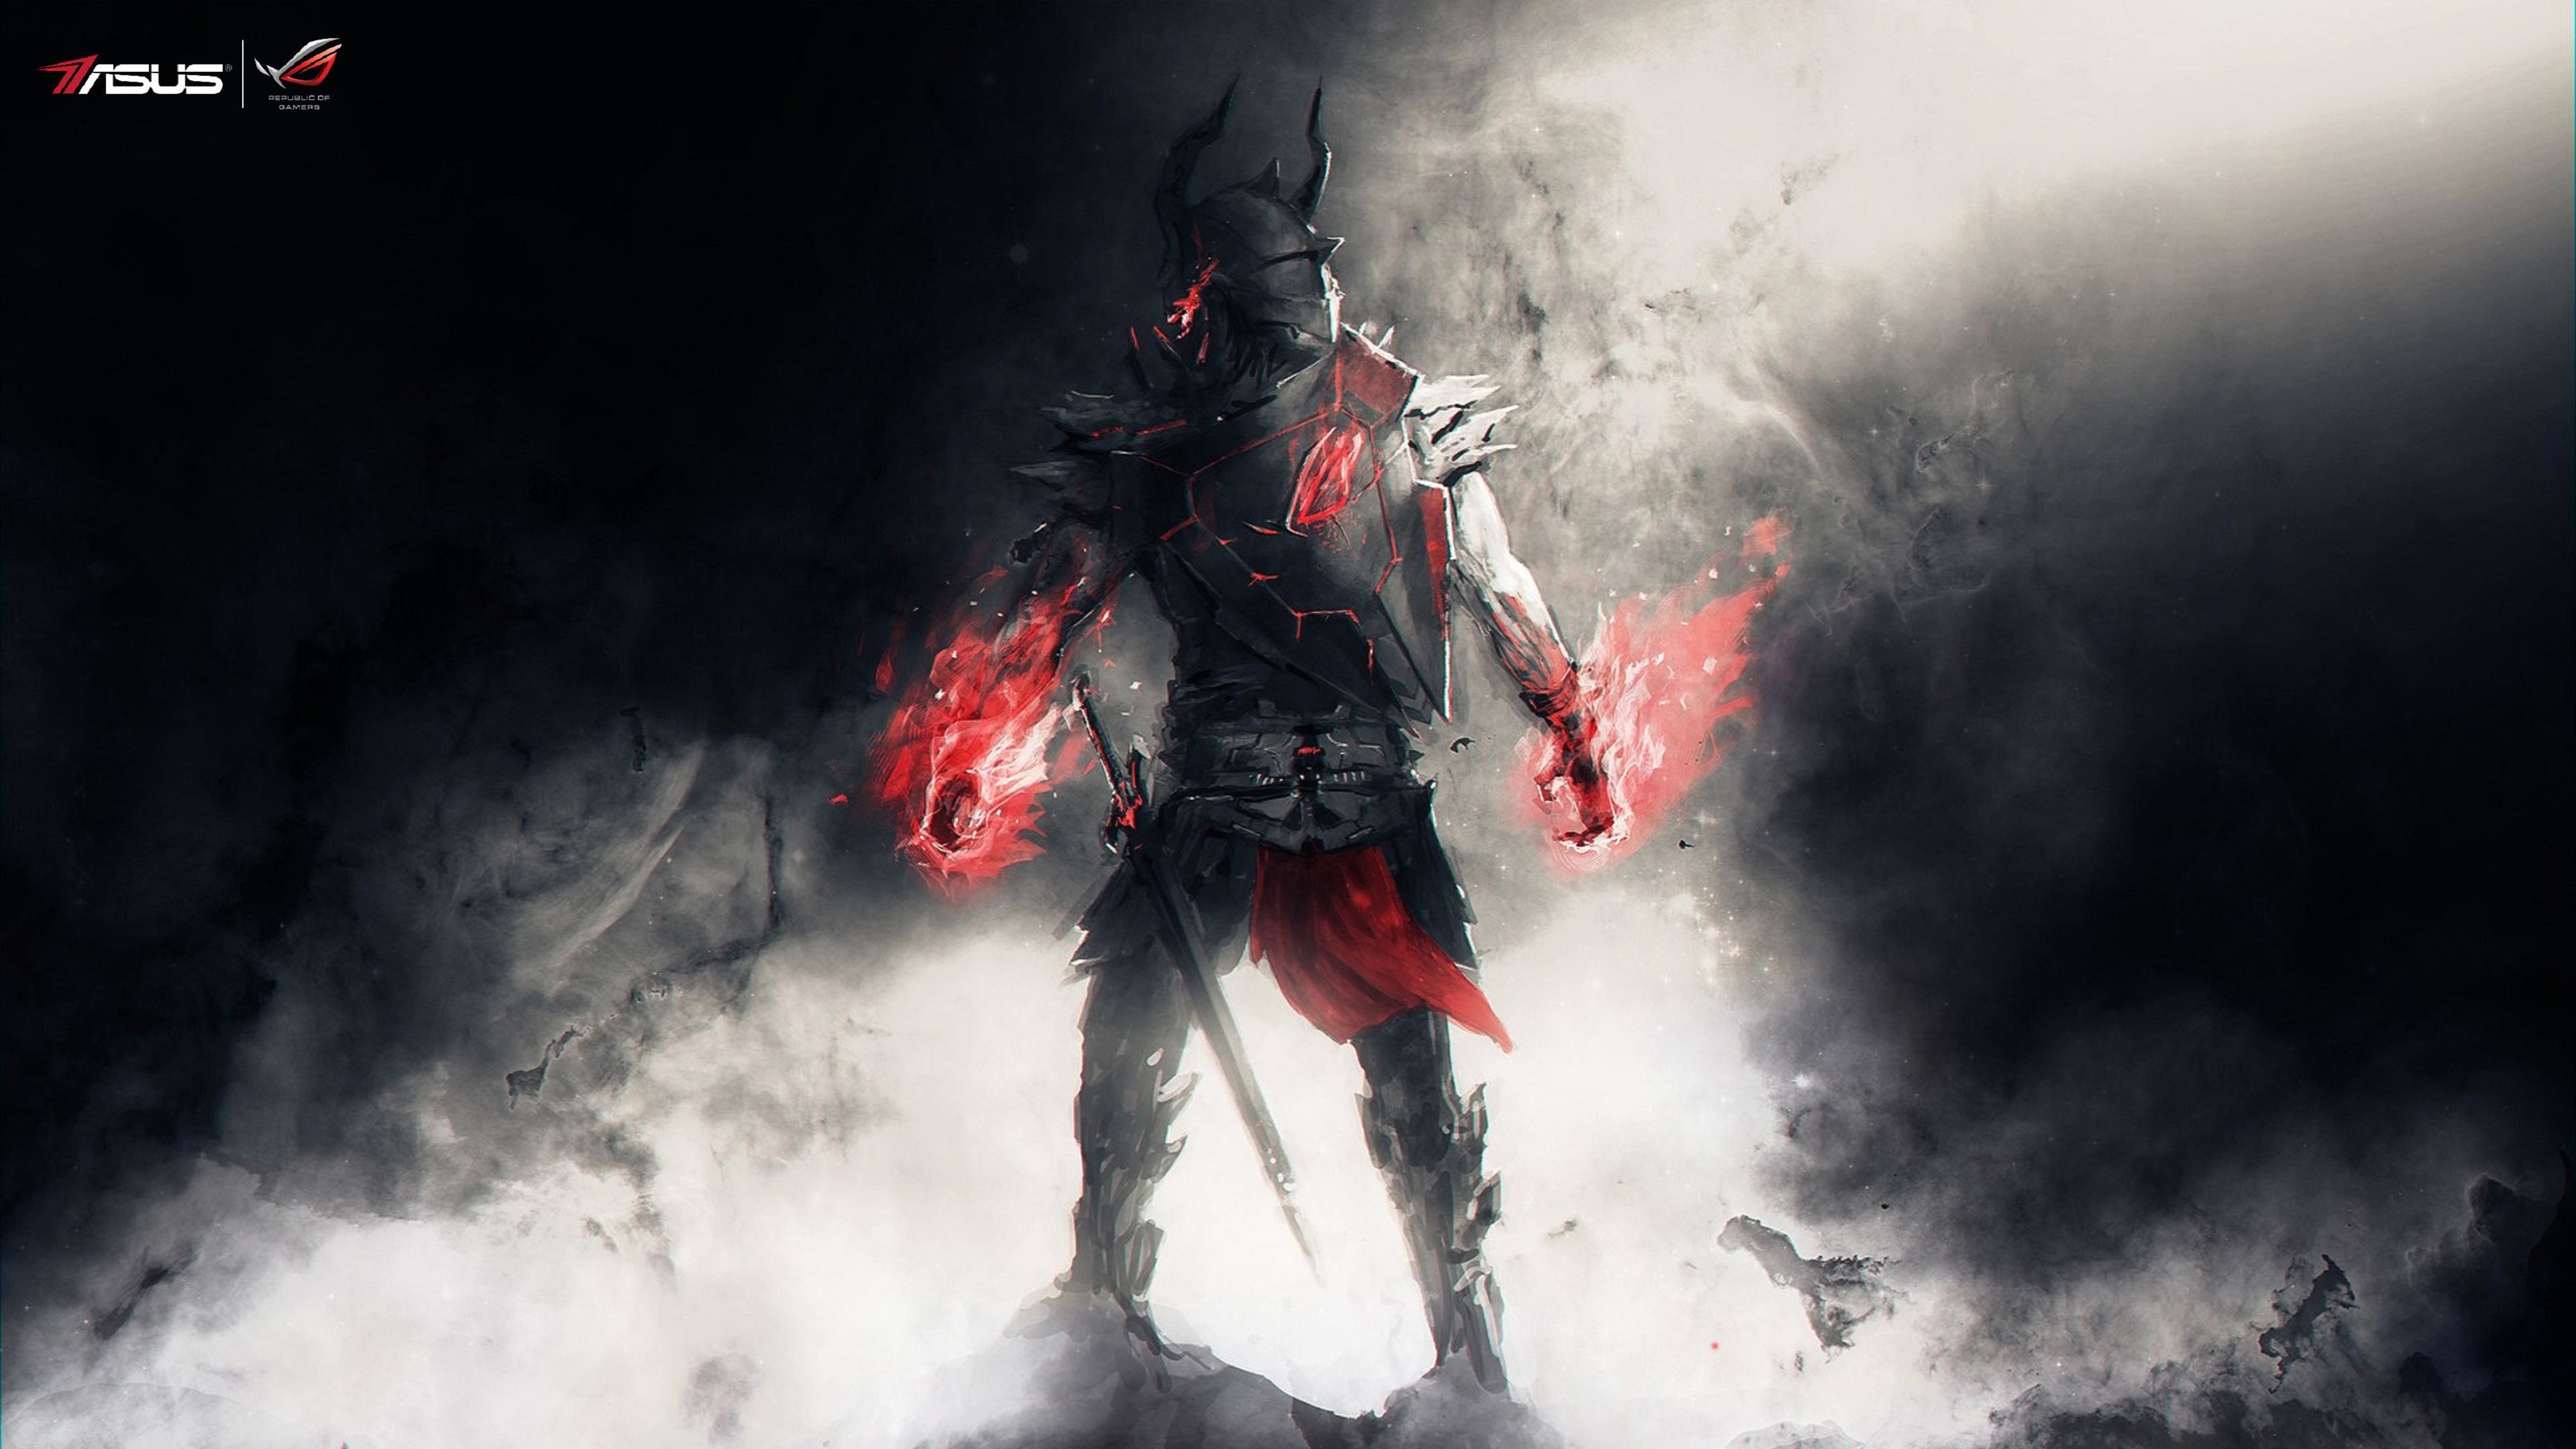 3840x2160 Best 20+ 4k gaming wallpaper ideas on Pinterest | The witcher 3 pc, Witcher  3 wild hunt and The witcher wild hunt